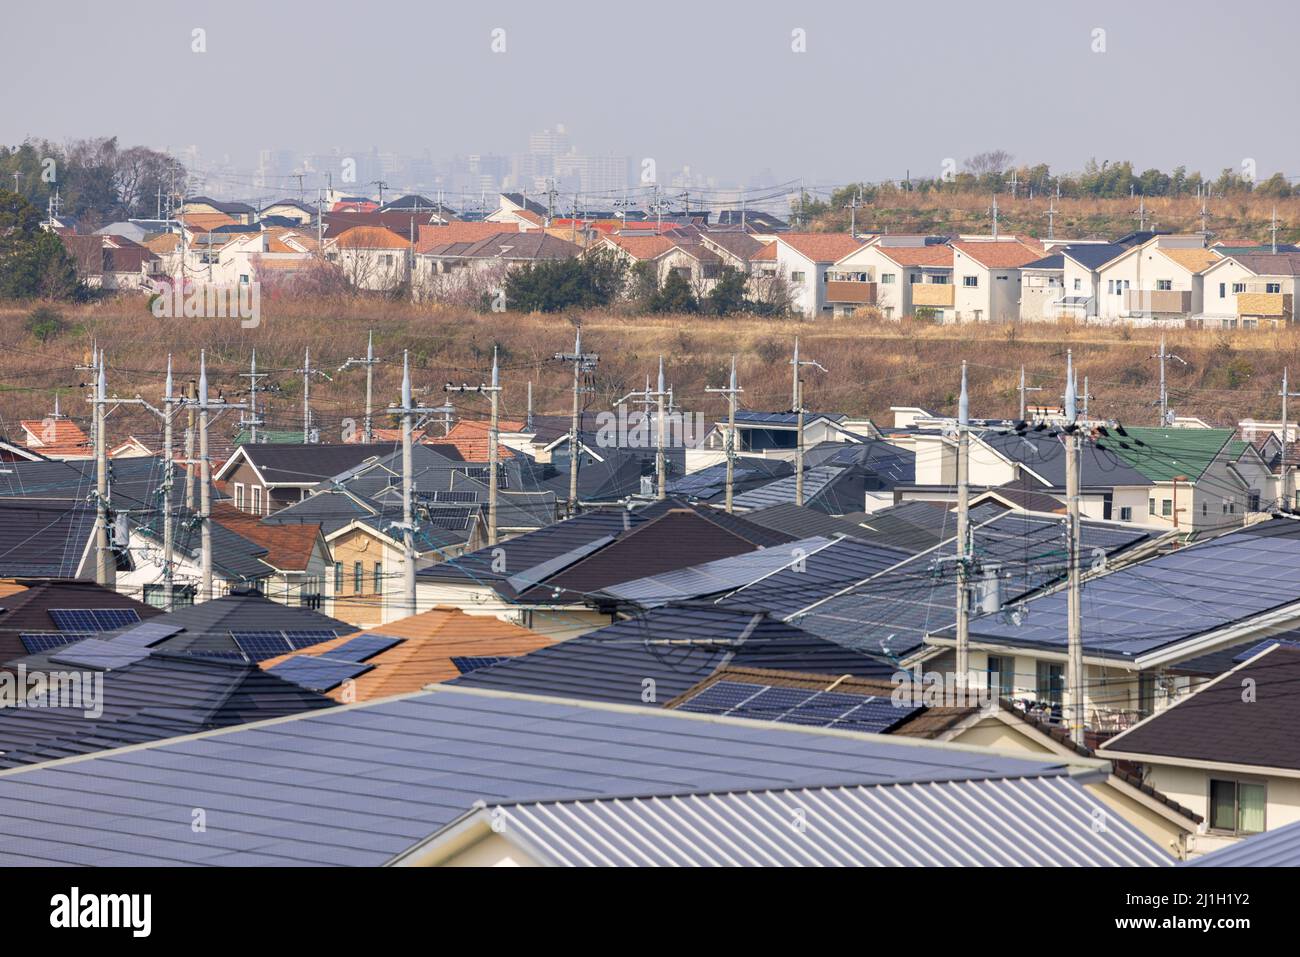 House roofs and electrical poles in suburban landscape Stock Photo